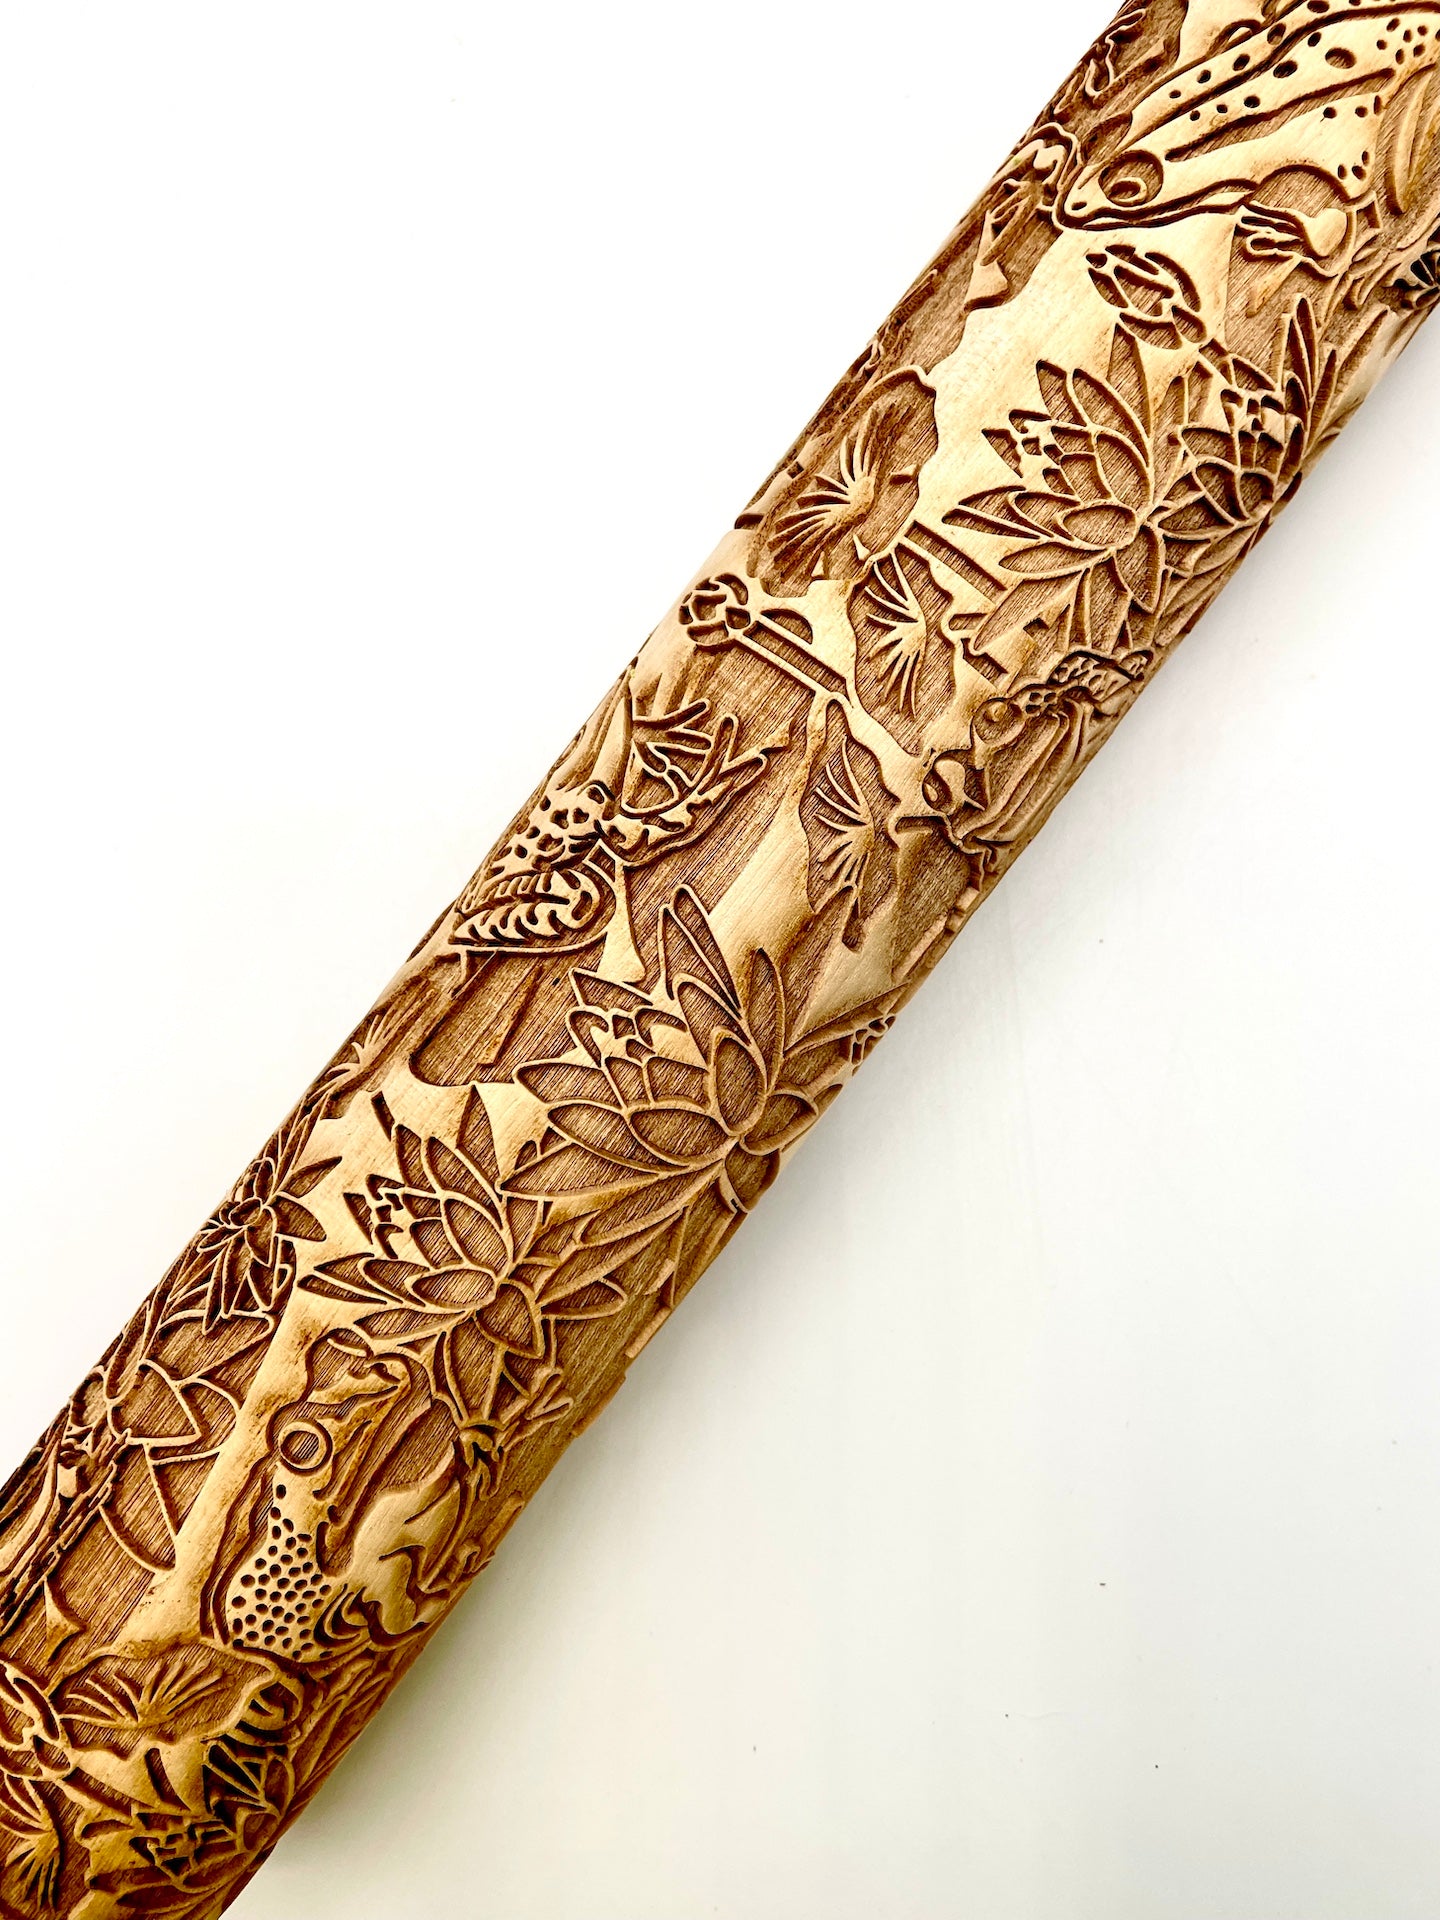 Frogs & Lily Pads Textured Rolling Pin